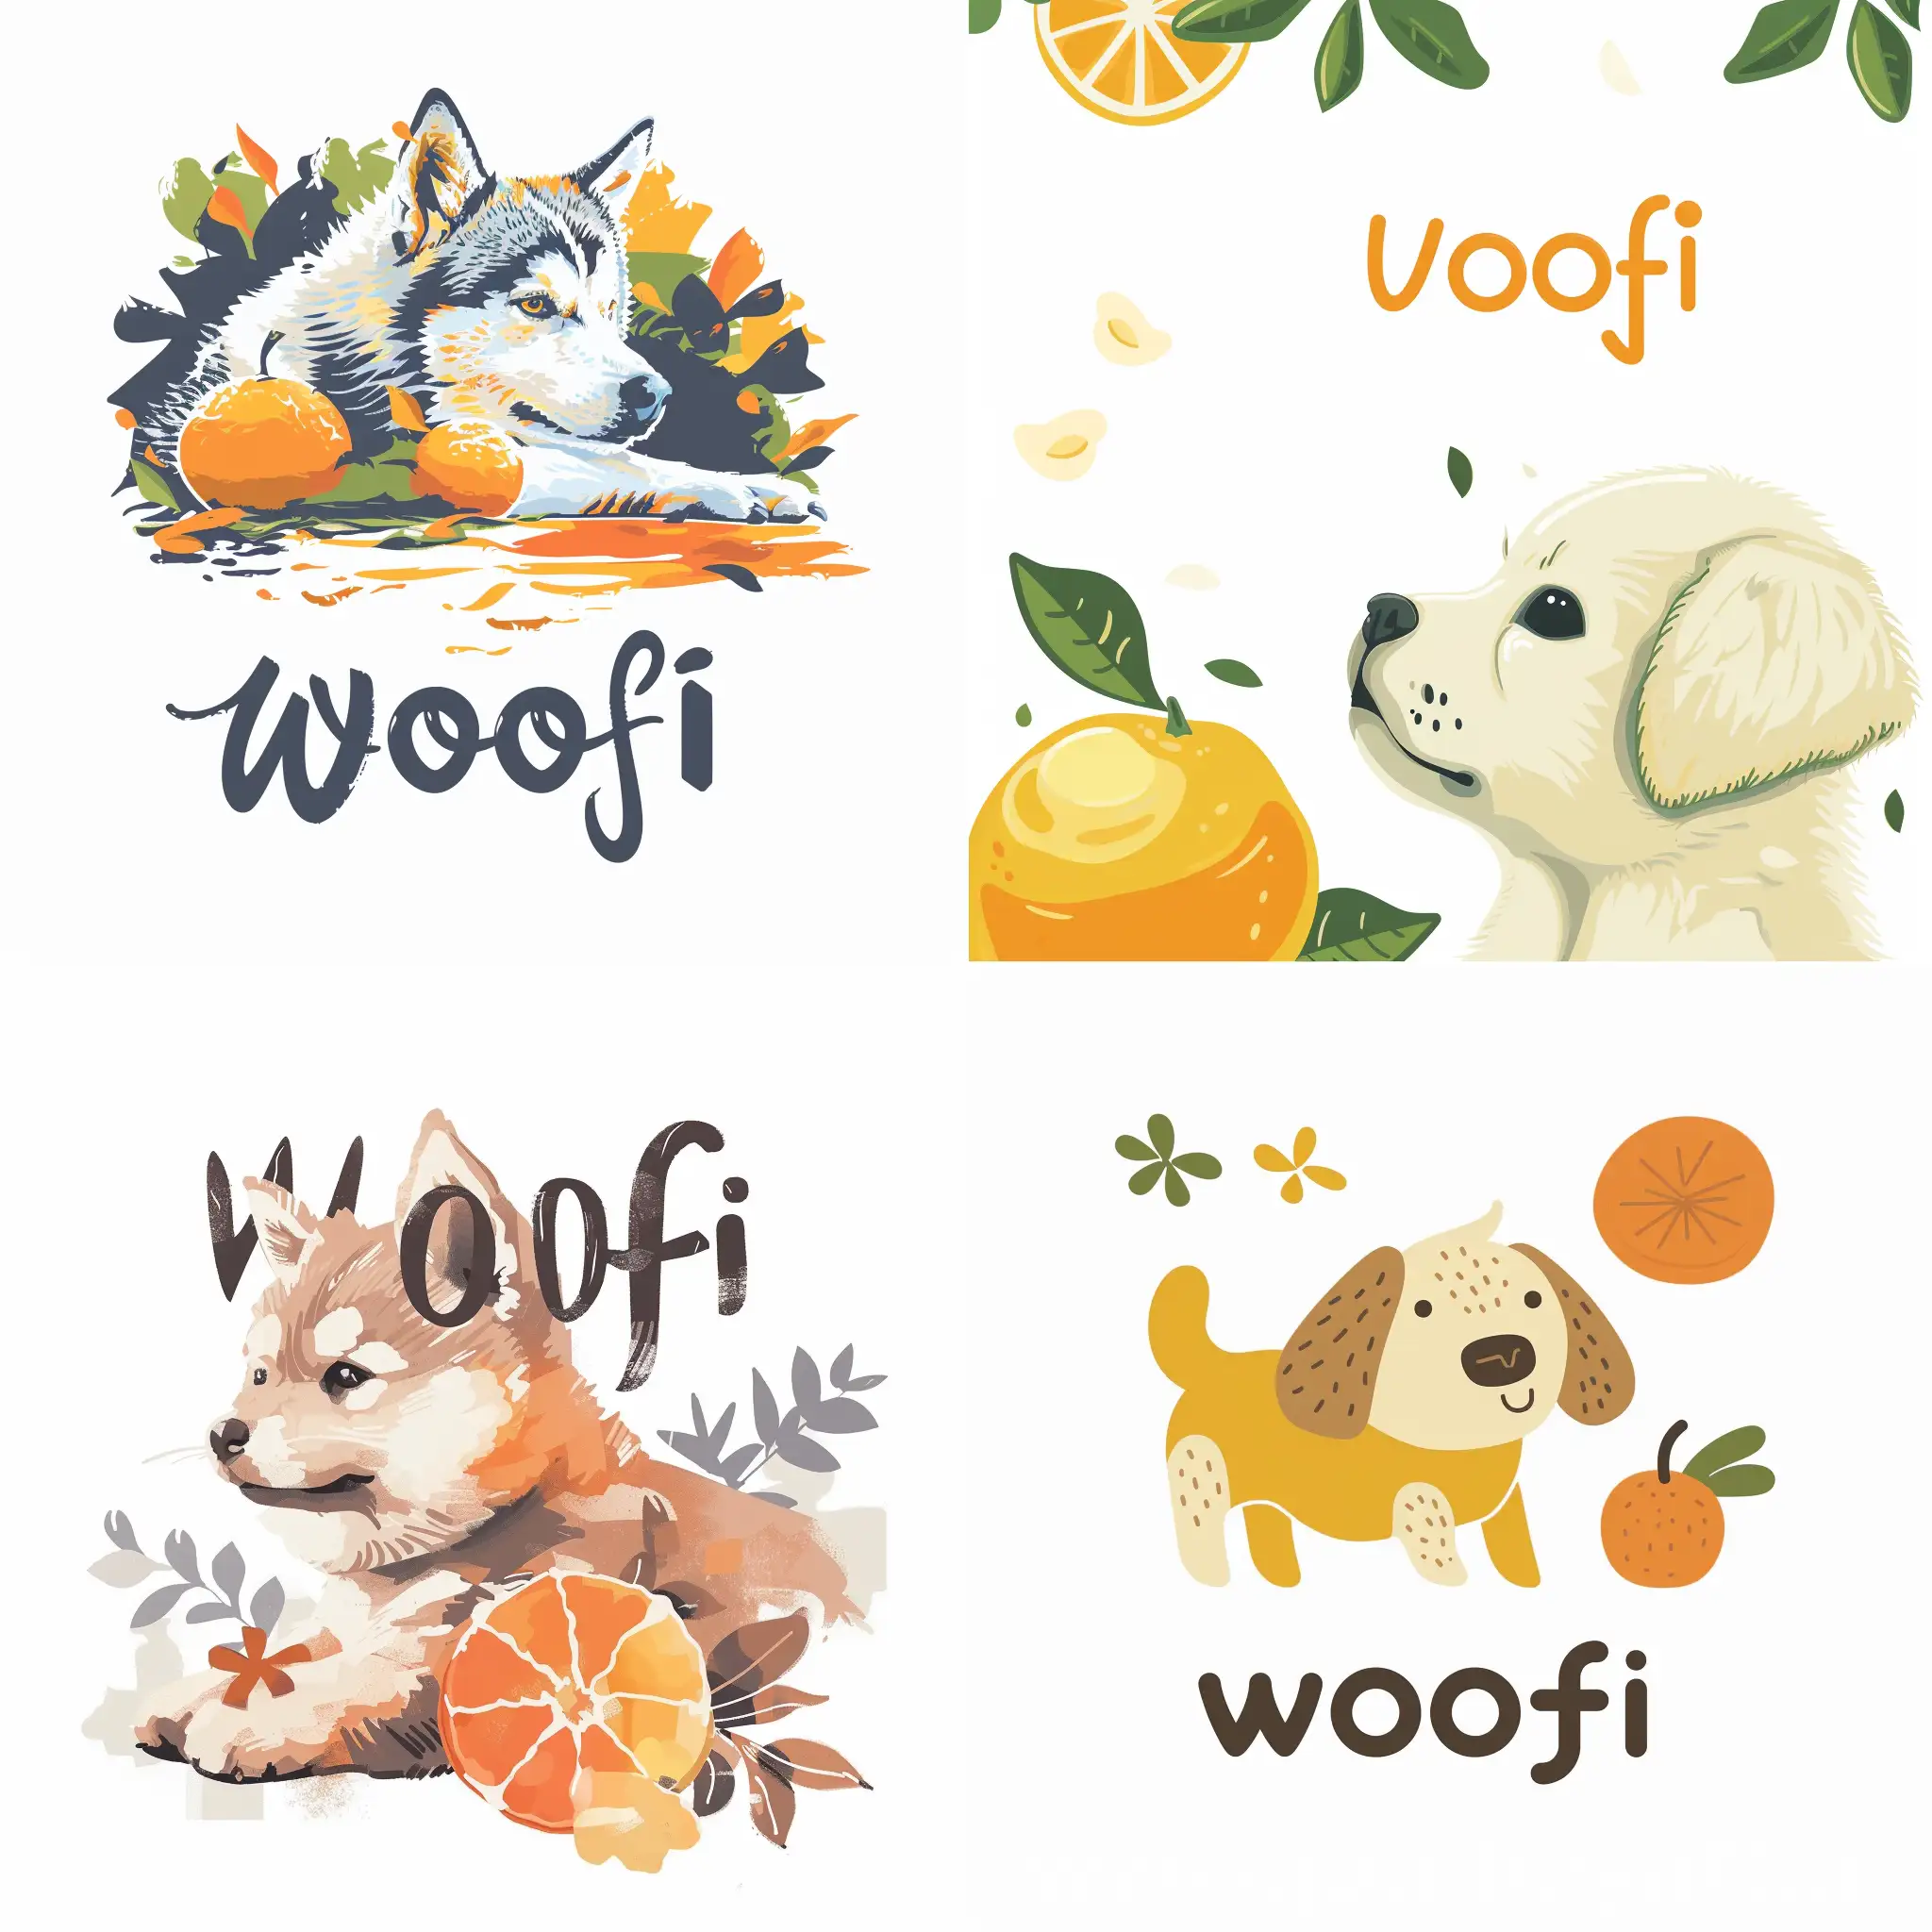 Please create a logo for me for a company called Woofi. The background is white, a flat vector-style painting, without much detail, of a dog and orange